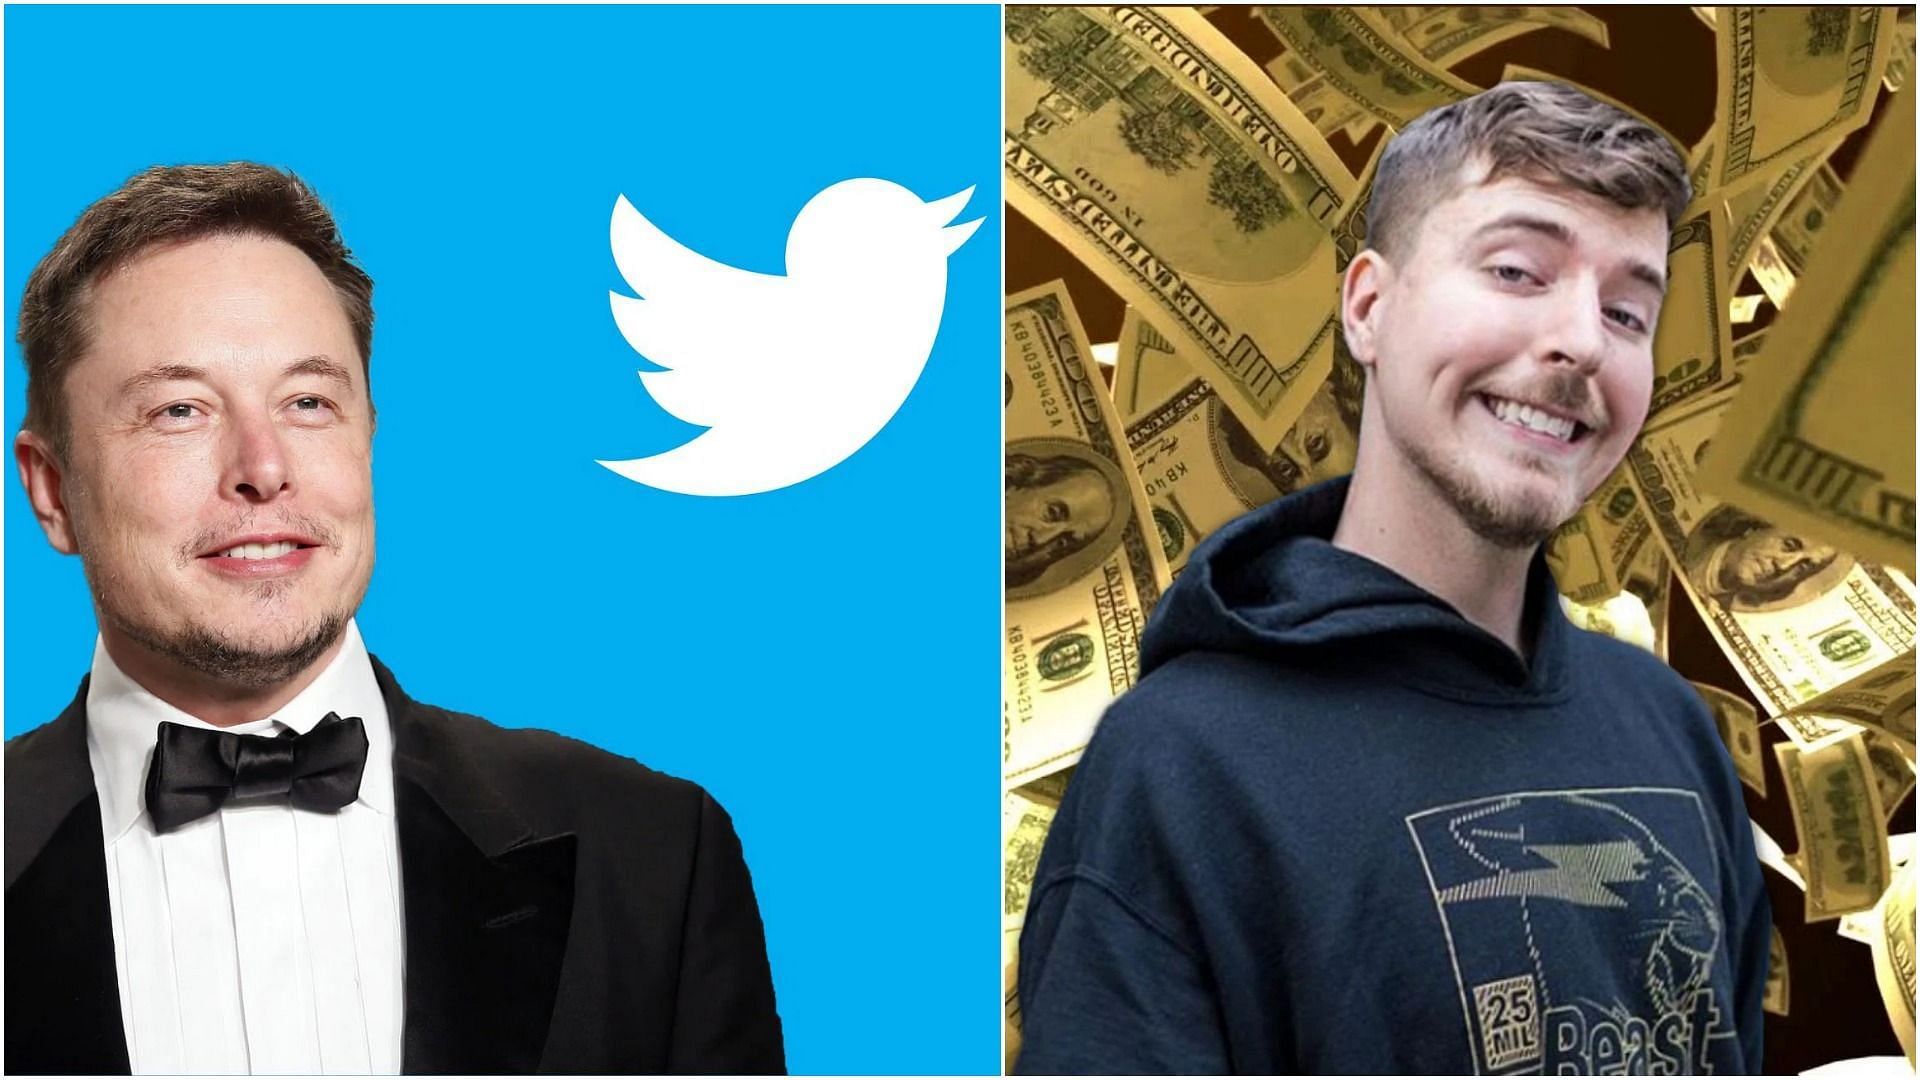 Fans react hilariously to MrBeast taking over Twitter after Elon Musk (Image via- Sportskeeda)